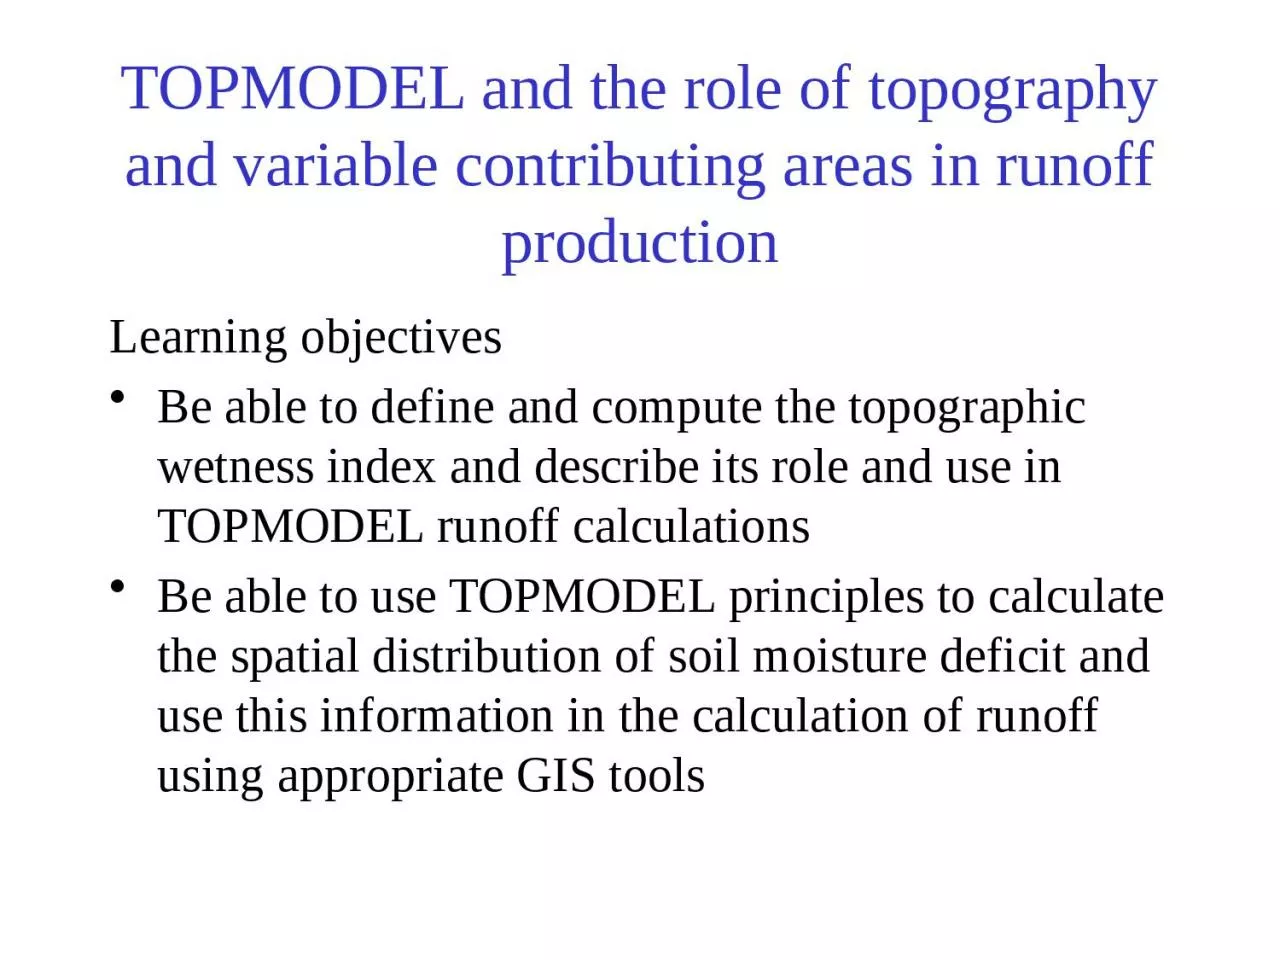 TOPMODEL and the role of topography and variable contributing areas in runoff production